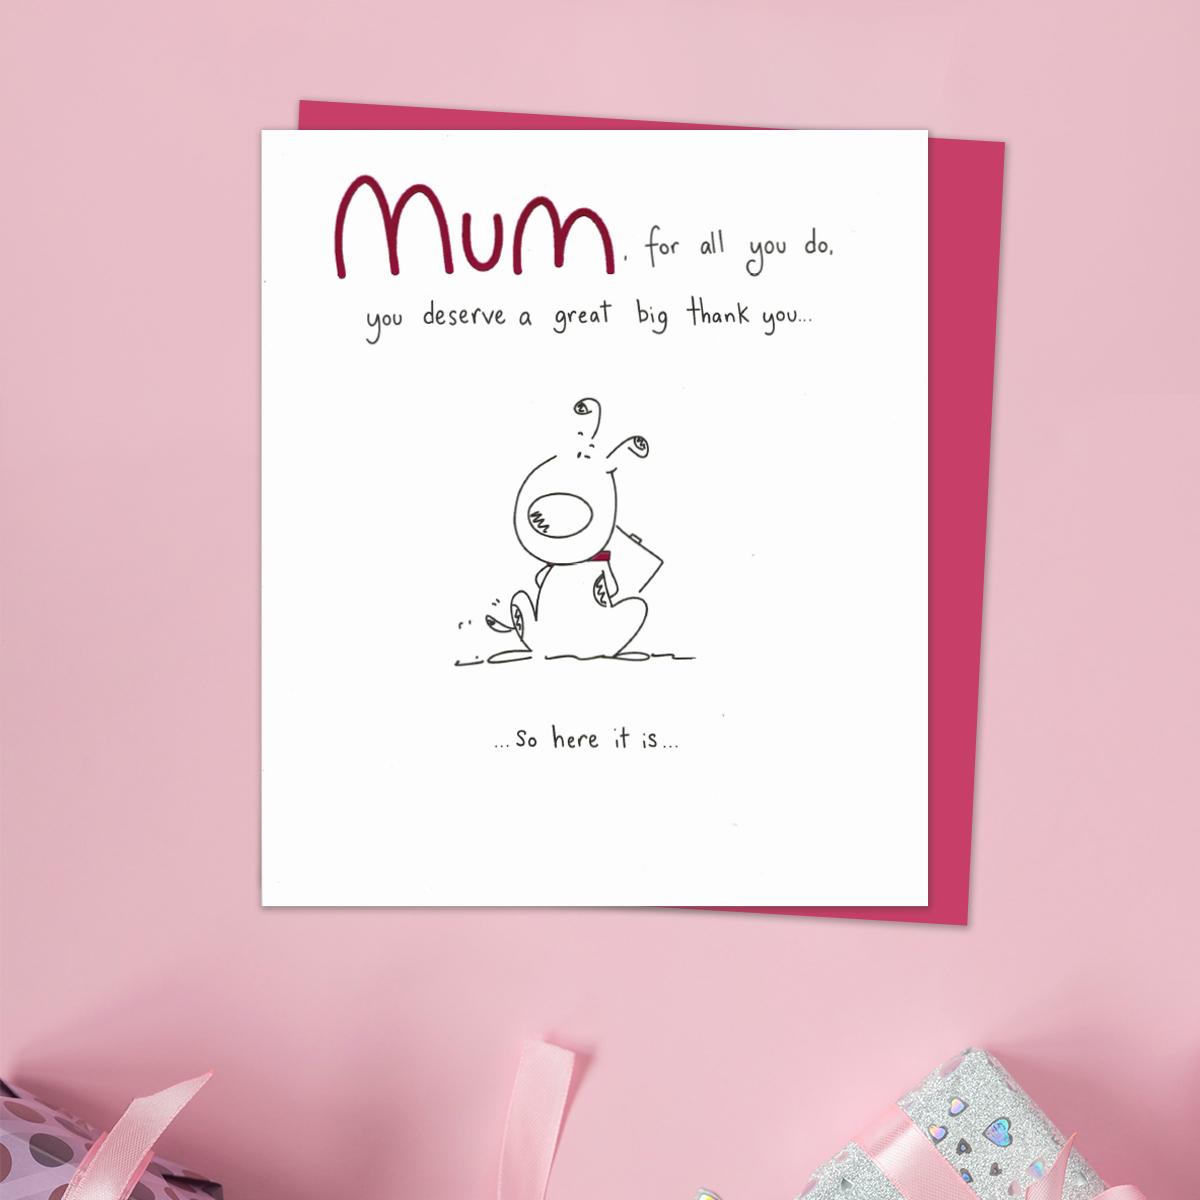 Mum, For All You Do, You Deserve A Great Big THANK YOU! Mother's Day Card. With Added Pink Foil Detail And Cerise Envelope